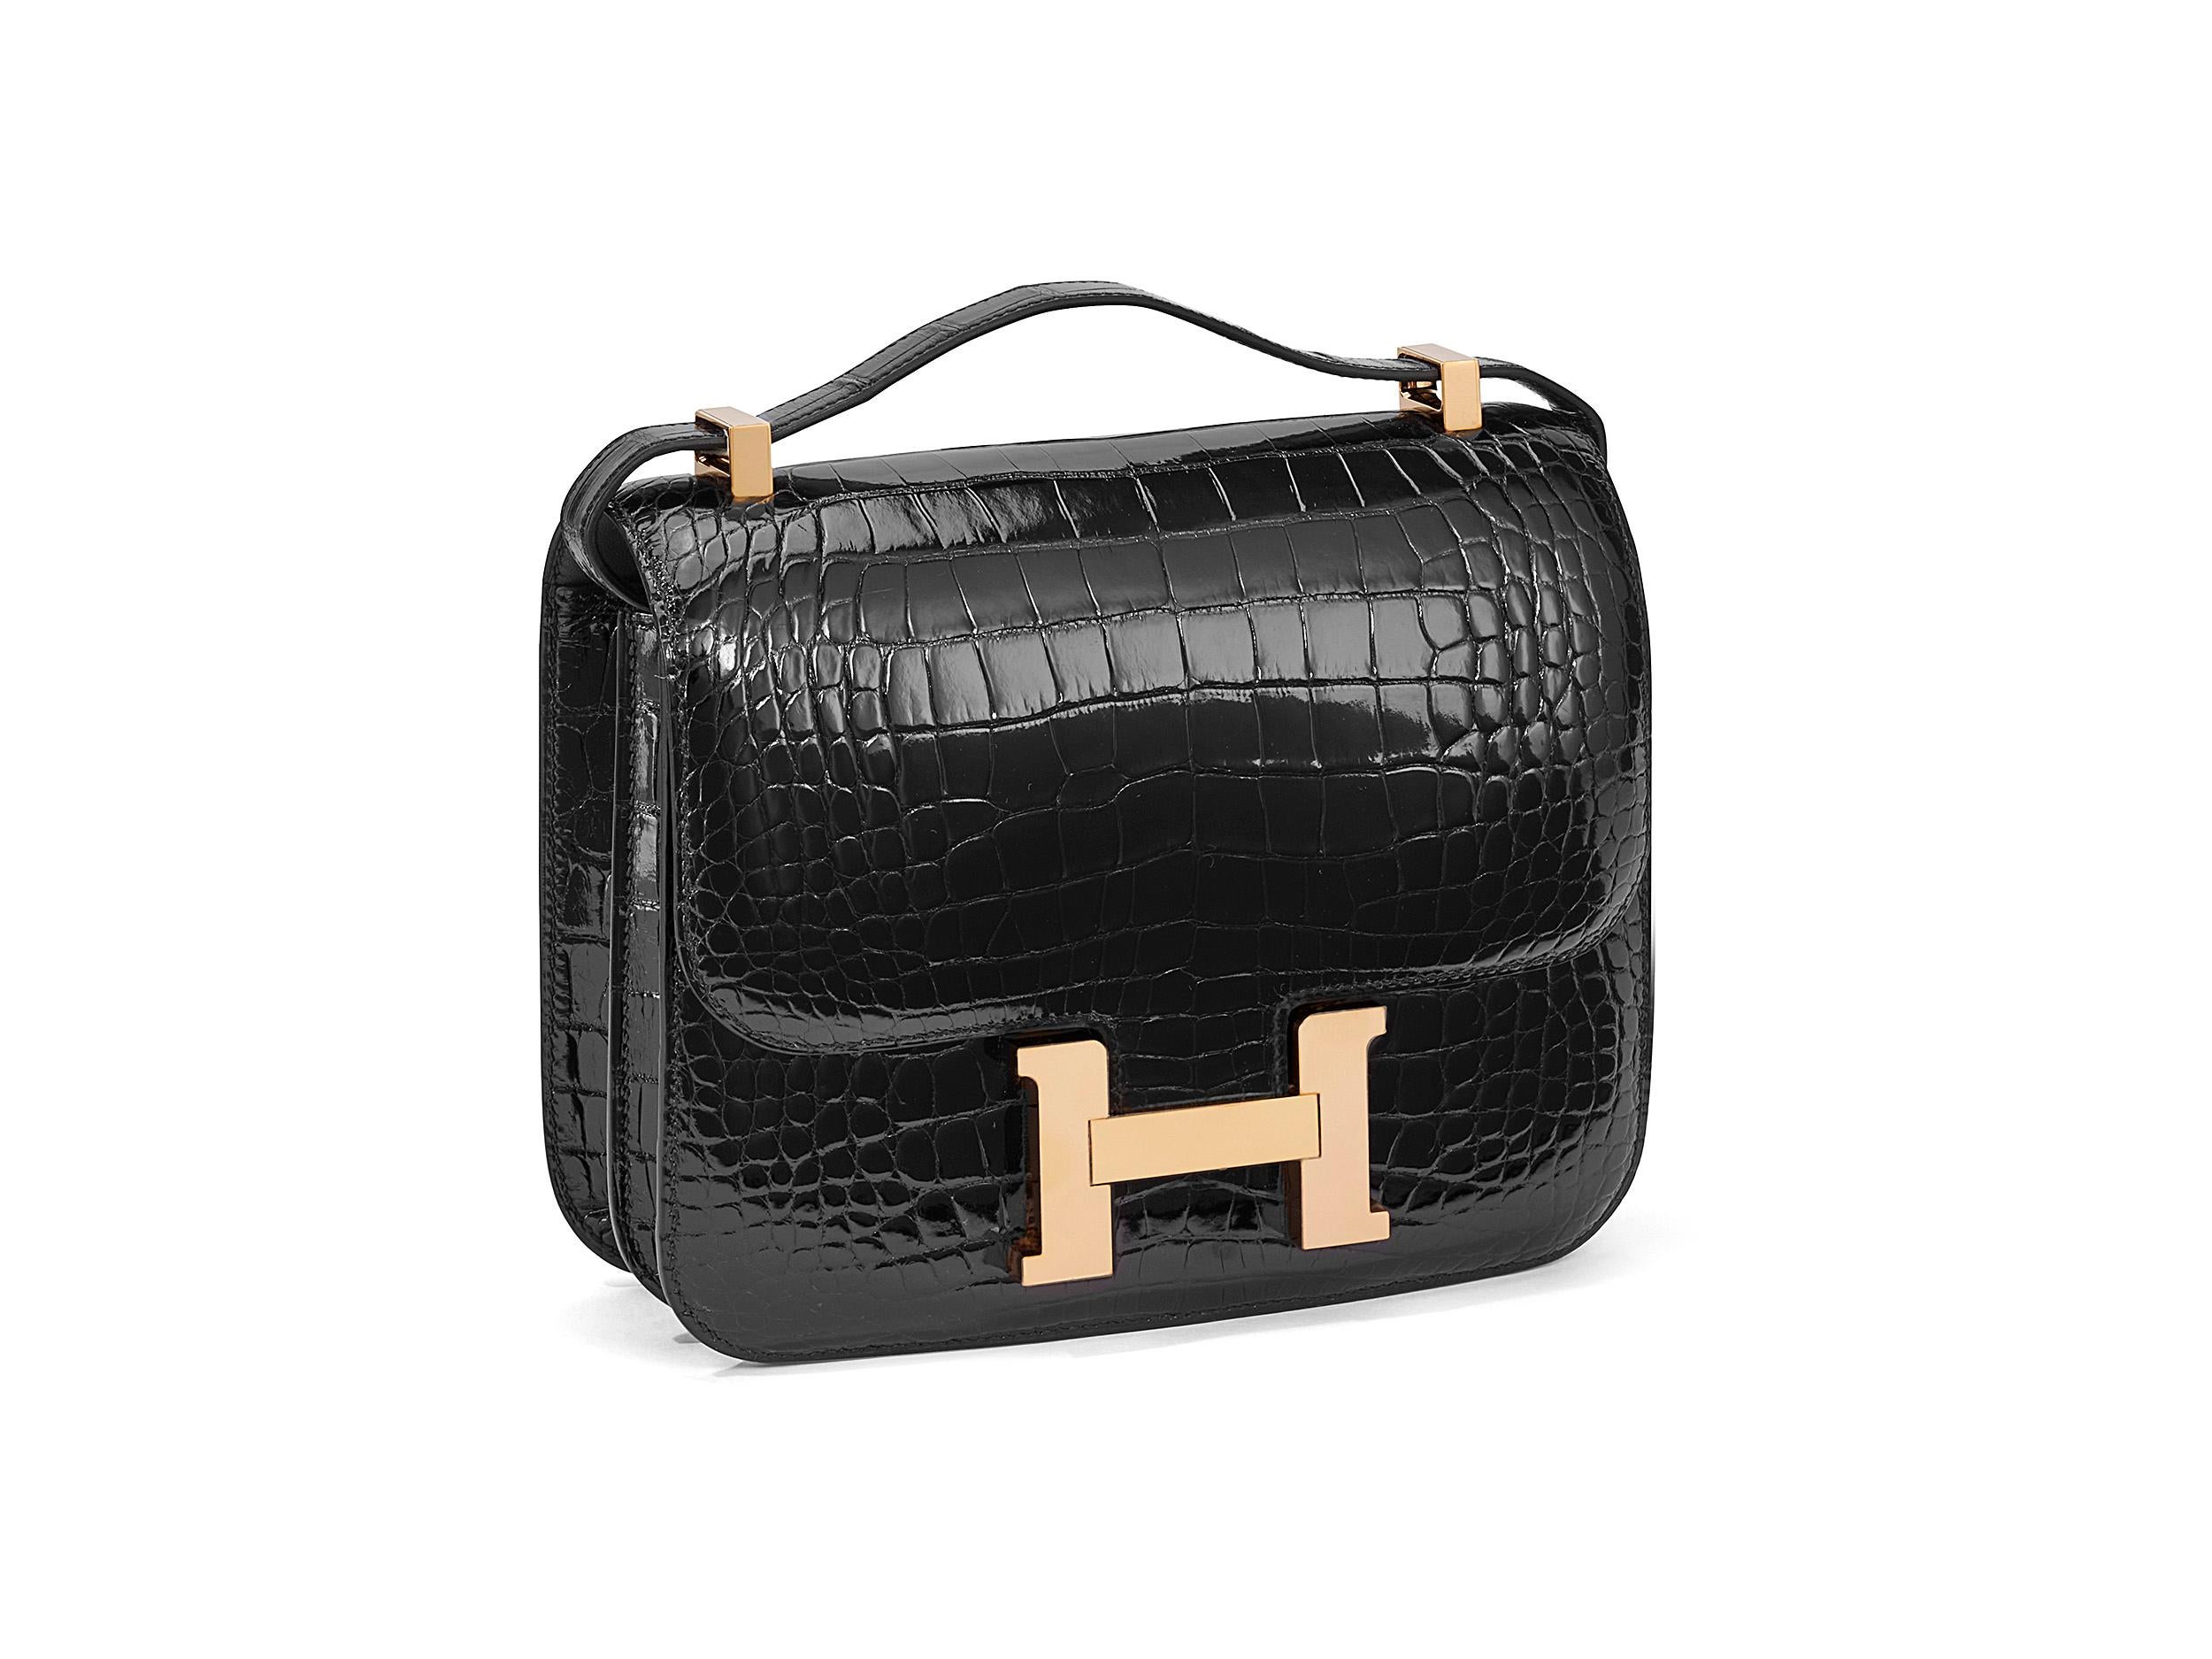 Hermès Constance 24 in noir and alligator mississippi lisse with gold hardware. The bag is unworn and comes as full set including the original receipt and Cites.
Stamp C (2018) 

